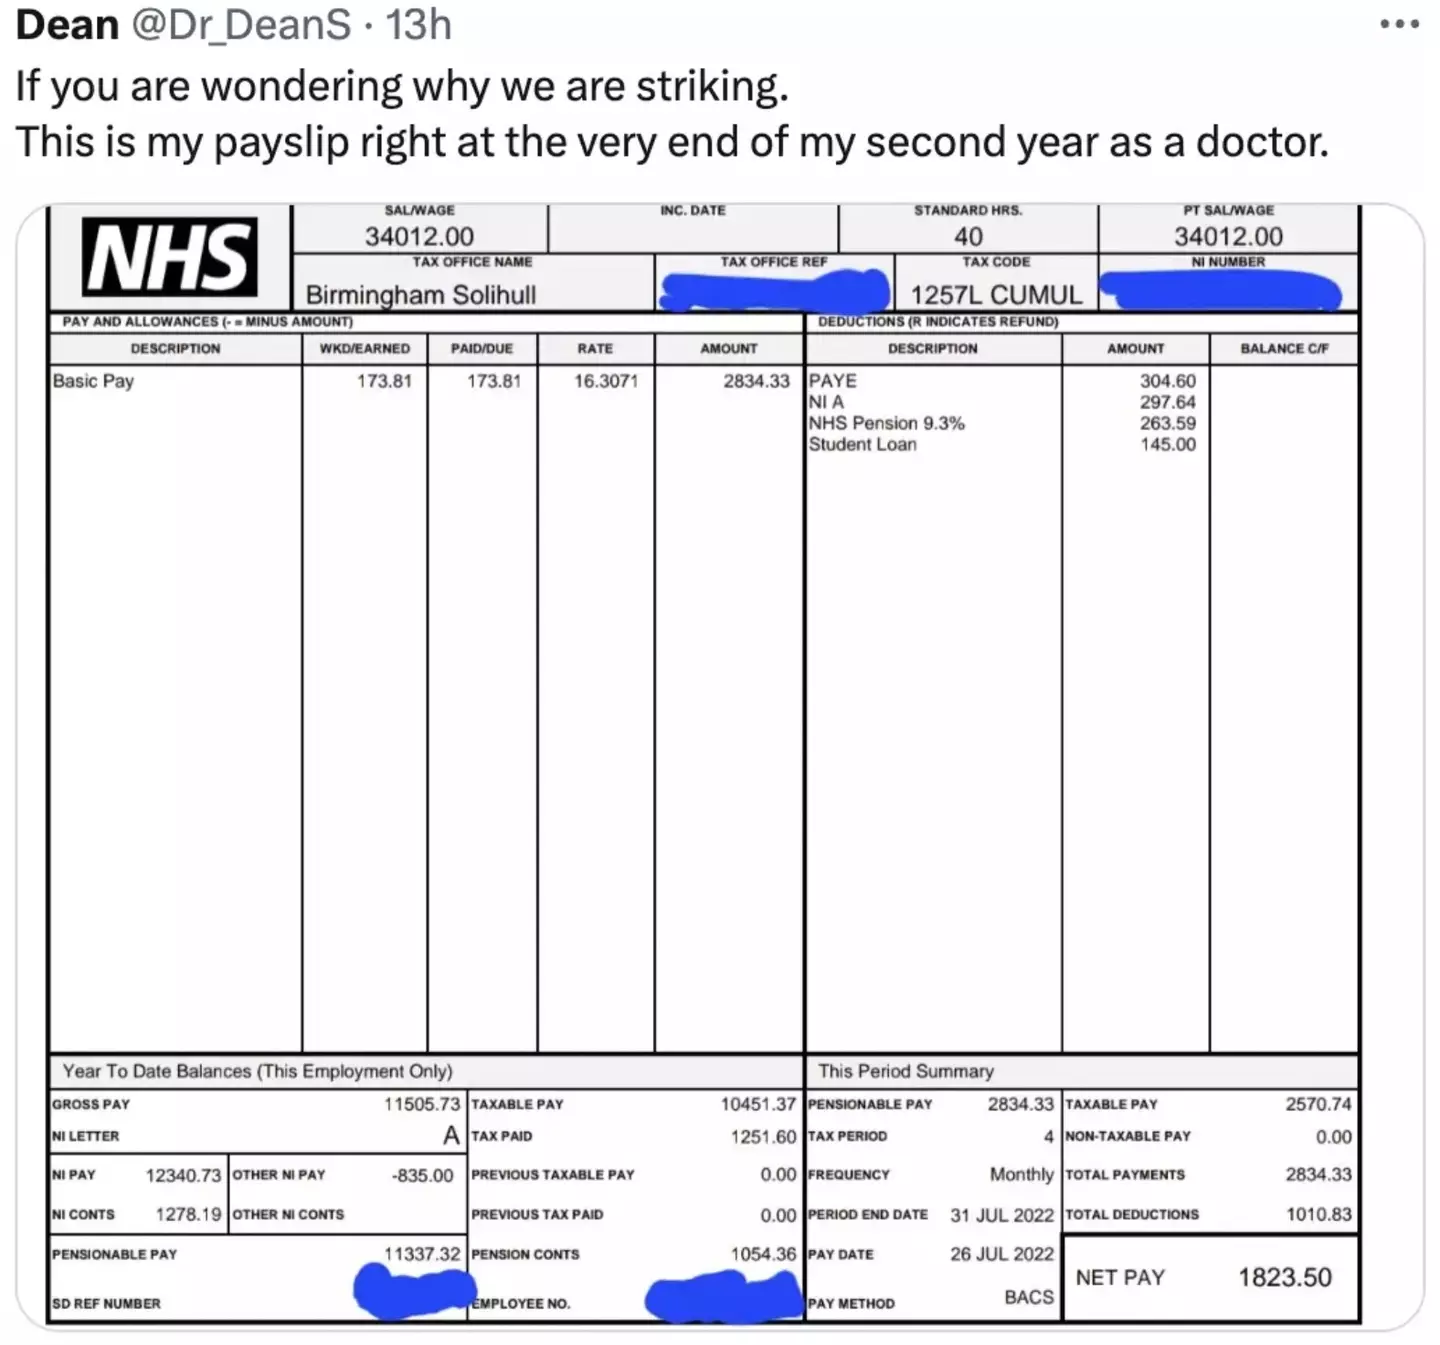 Dean shared his payslip after two years on the job.